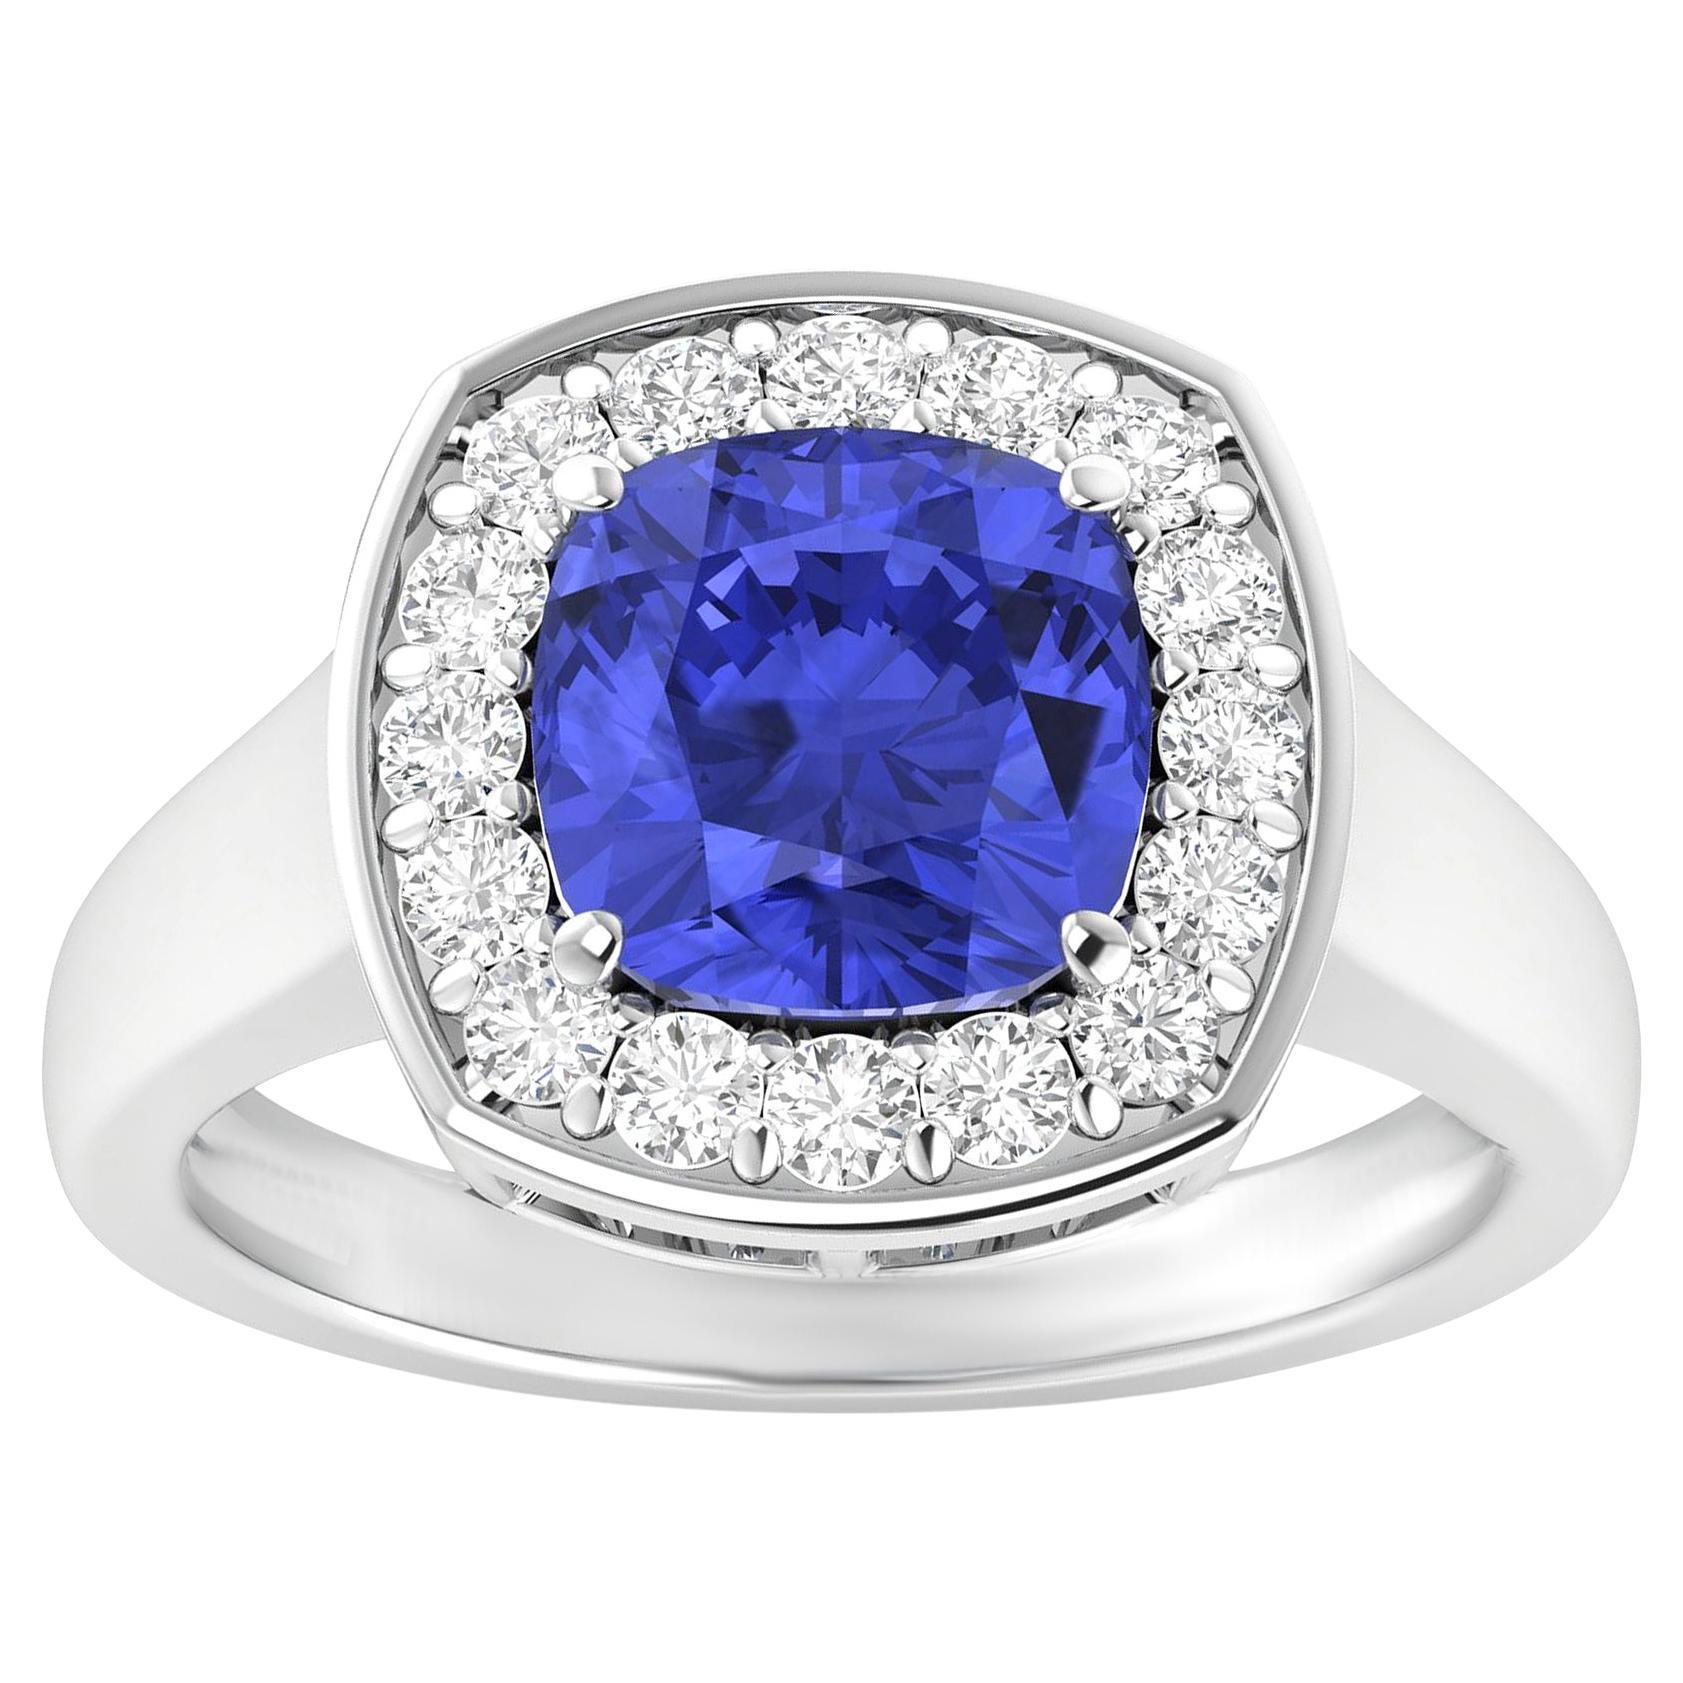 Tanzanite Ring With Diamonds 2.58 Carats 14K White Gold For Sale